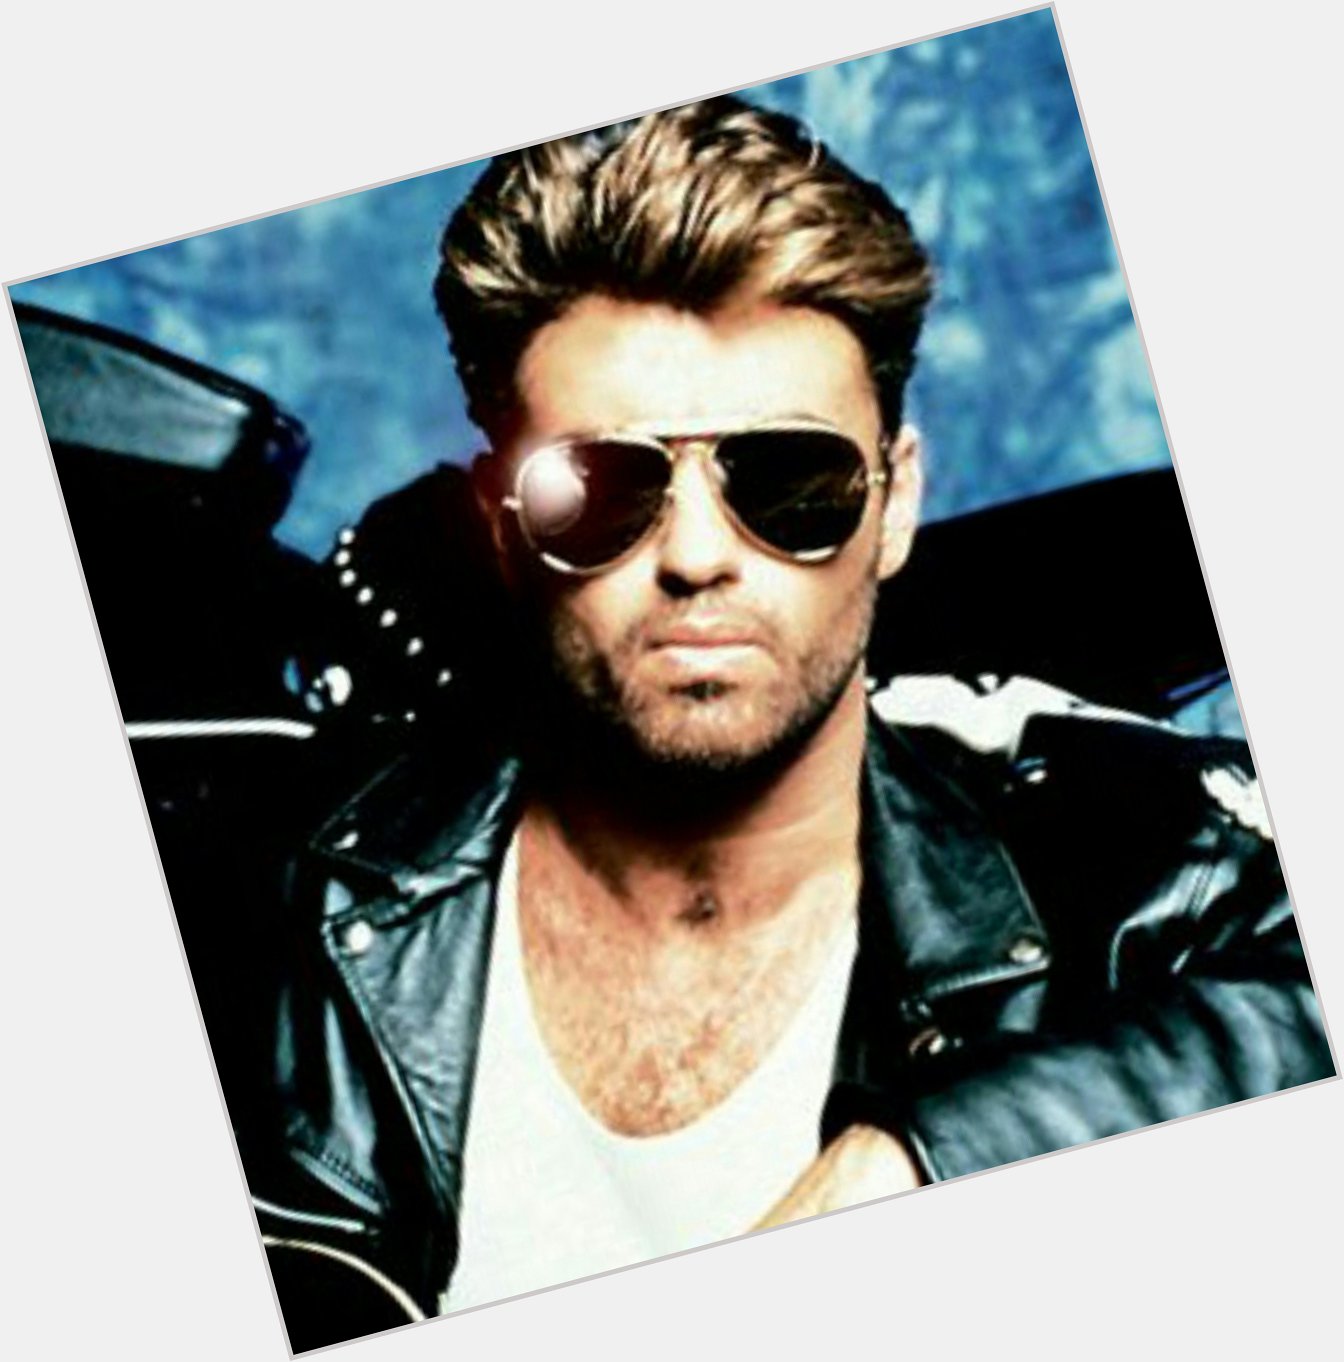 Happy birthday George Michael. He would have been 54 today 